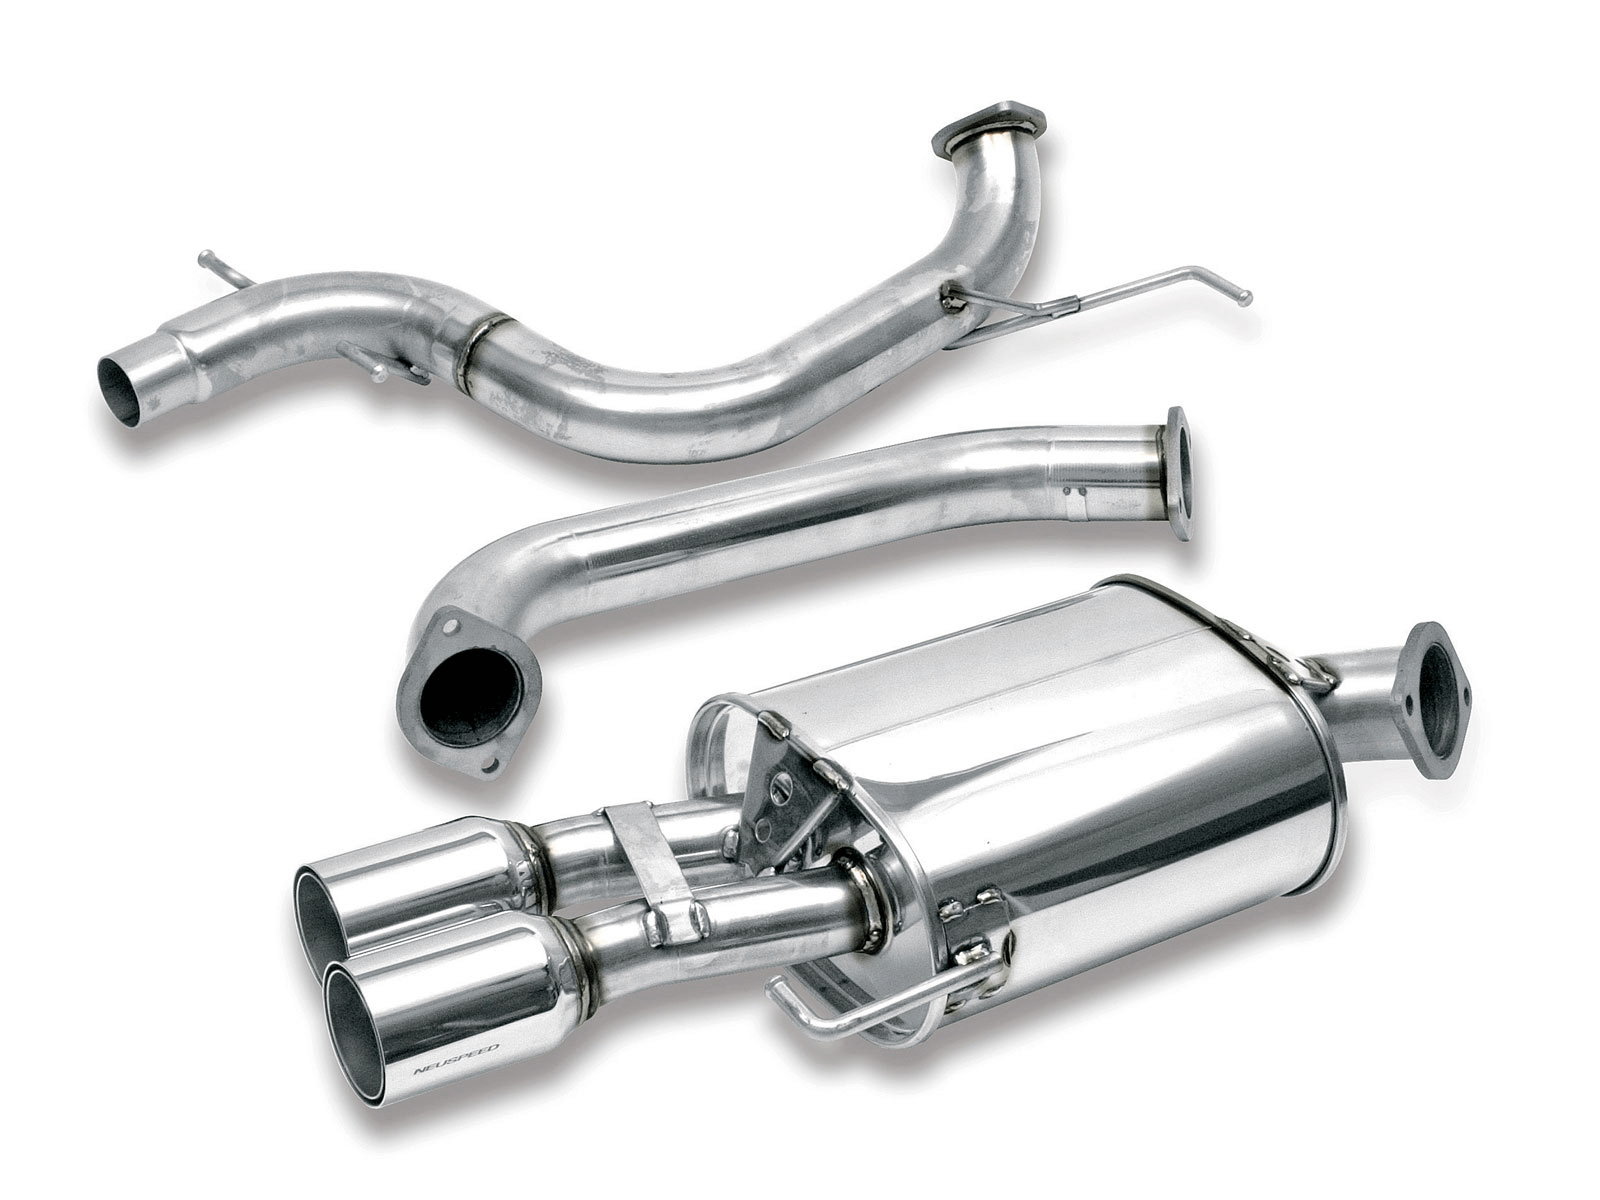 auto exhaust system